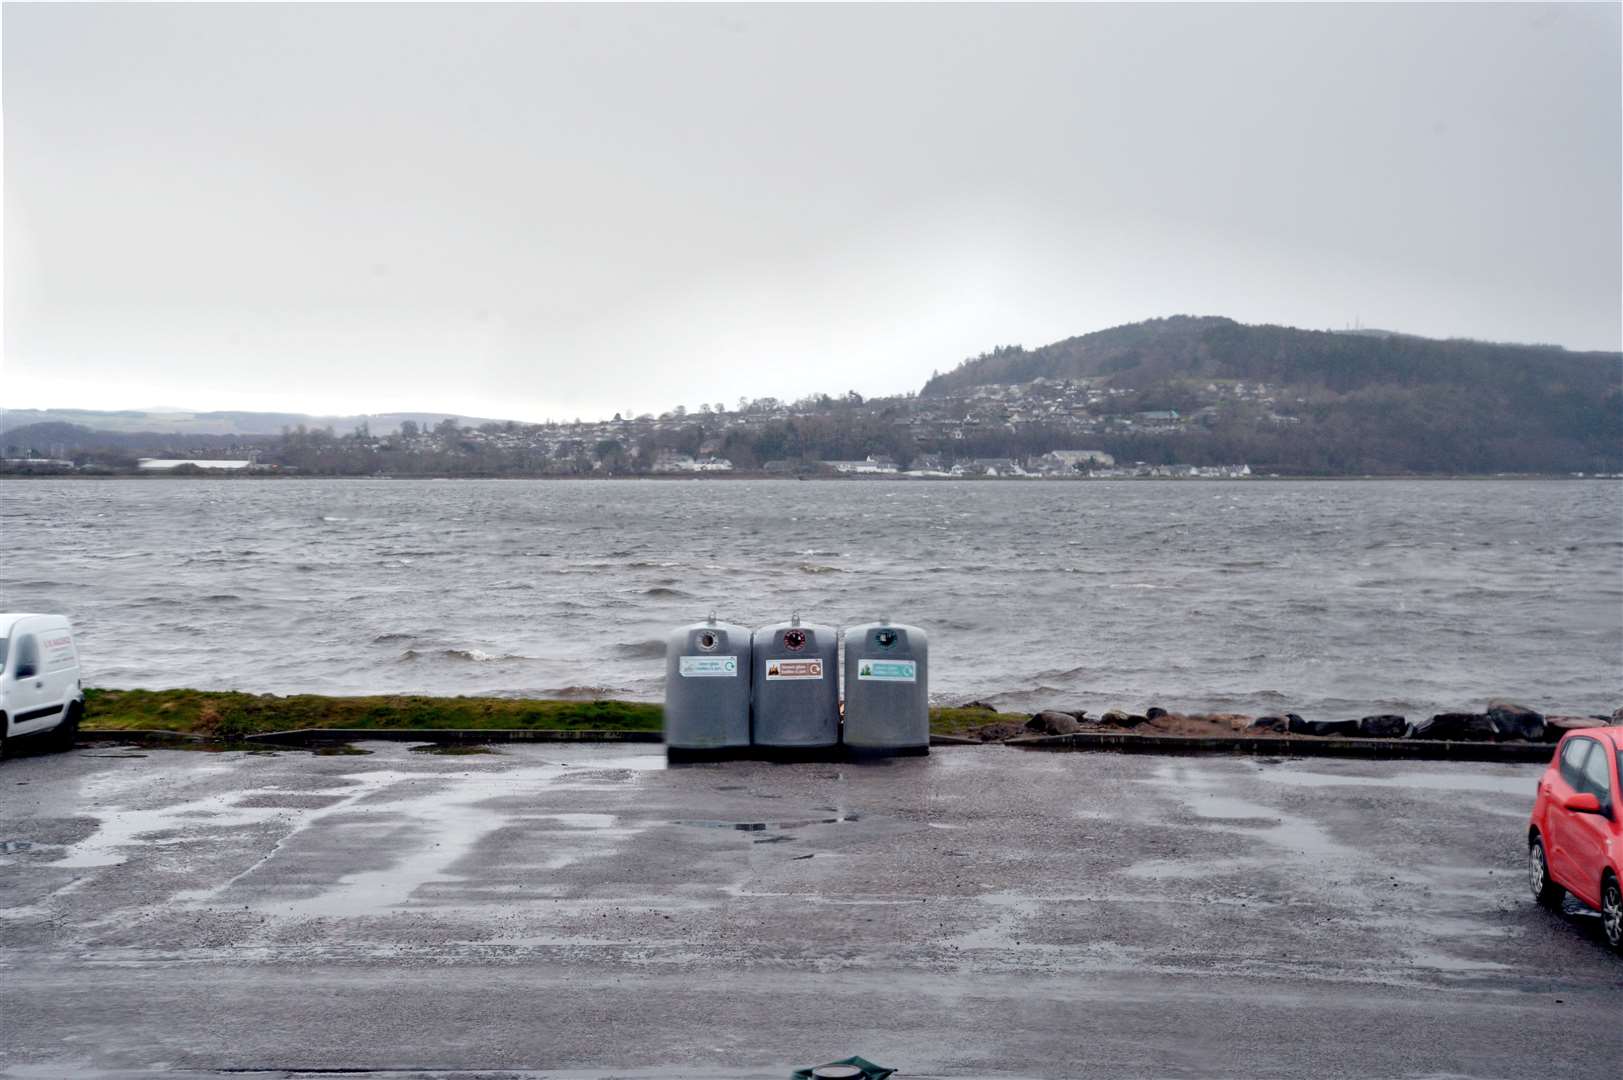 The bottle bank in North Kessock.